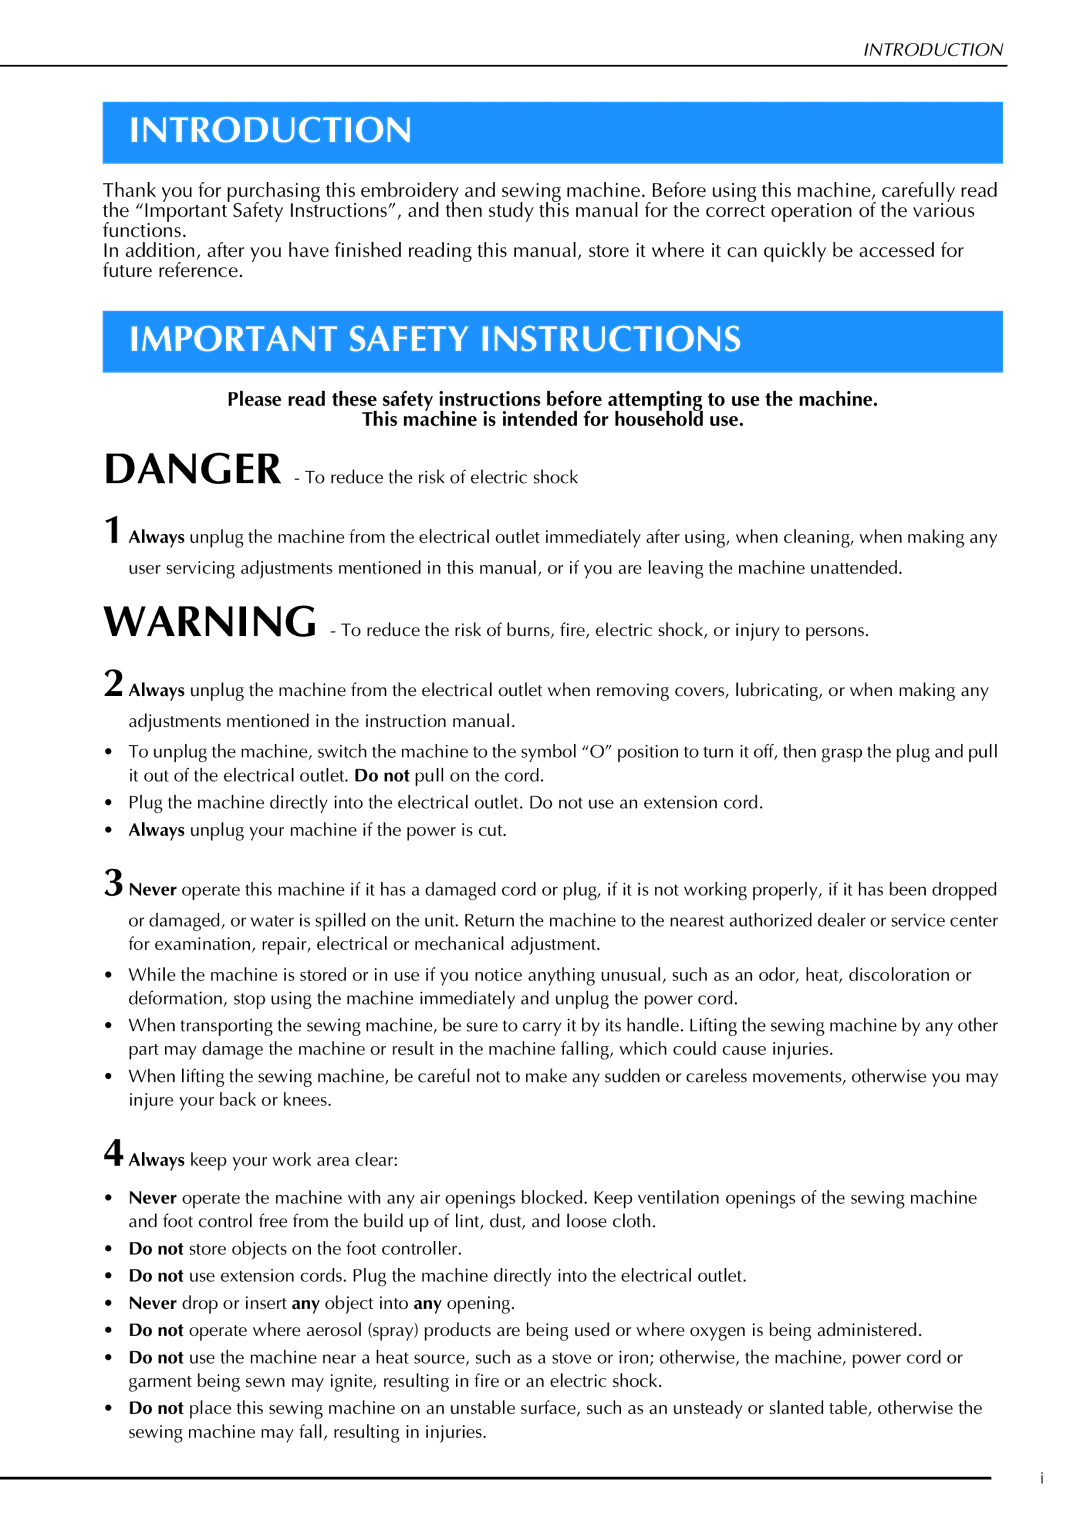 Brother 882-W02, 882-W01 operation manual Introduction, Important Safety Instructions 